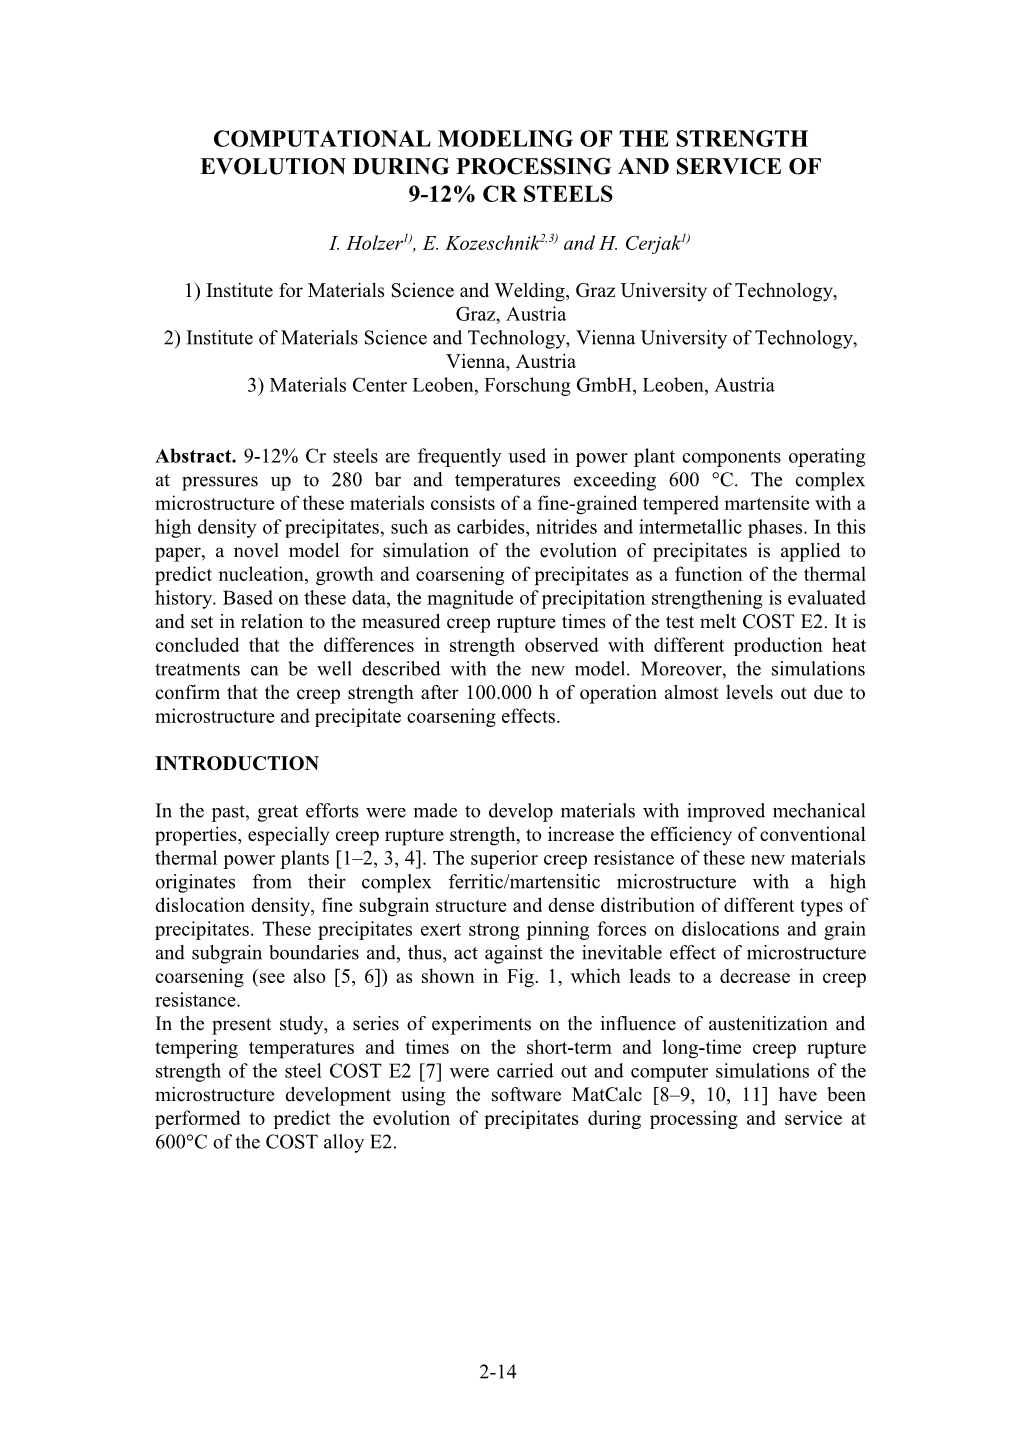 Computational Modeling of the Strength Evolution During Processing and Service of 9 12%